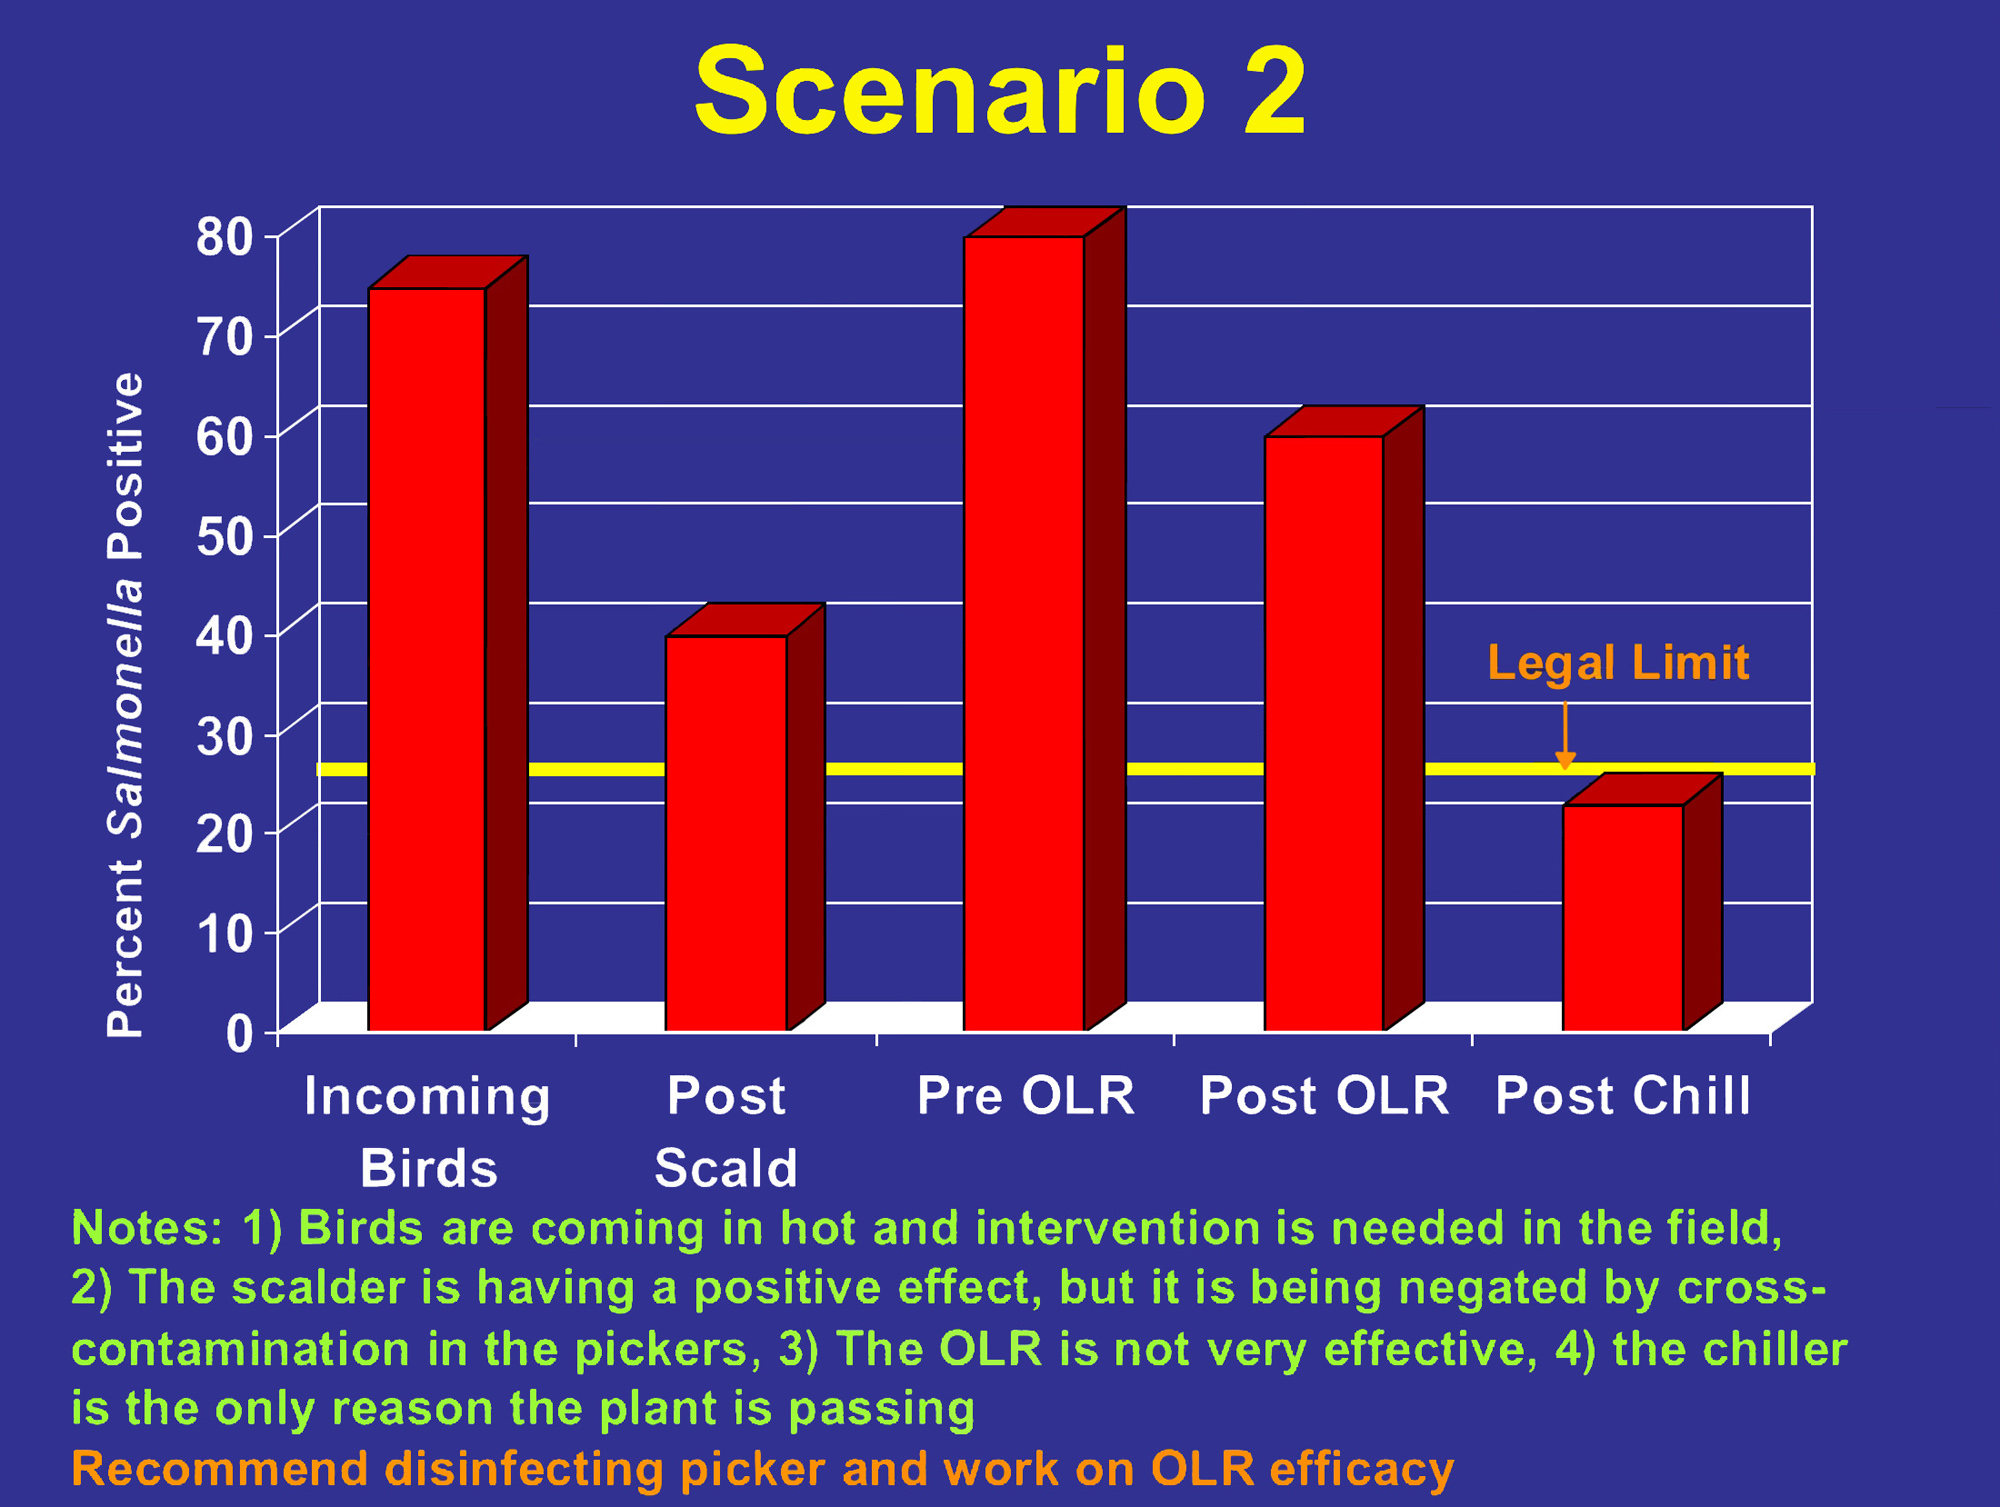 Bar graph showing percent of birds positive for salmonella throughout the plant process. Around 70% of incoming birds are positive. Post scald, around 40% are positive. Pre-OLR, 80% of birds are positive. Post OLR, around 60% are positive. Post chill, around 20% are positive, which is below the legal limit.